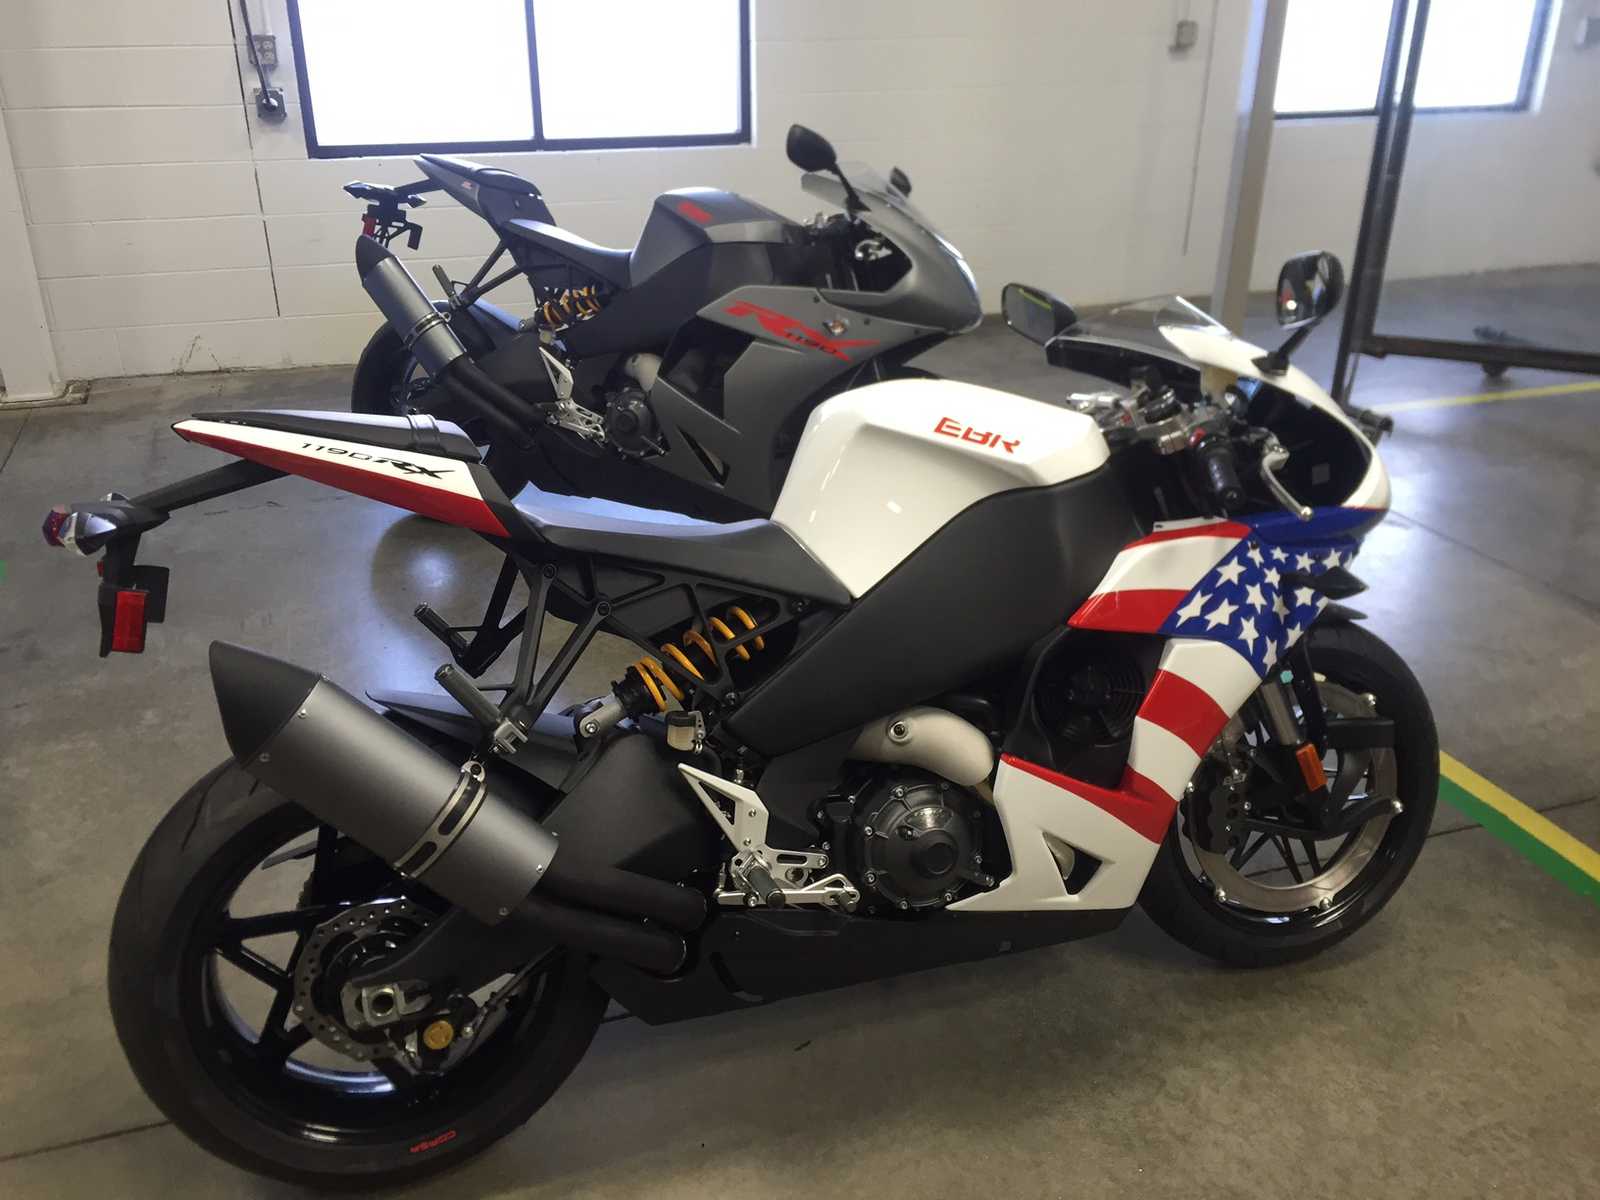 First 16 Models Roll Off Ebr Production Line In Wisconsin Roadracing World Magazine Motorcycle Riding Racing Tech News